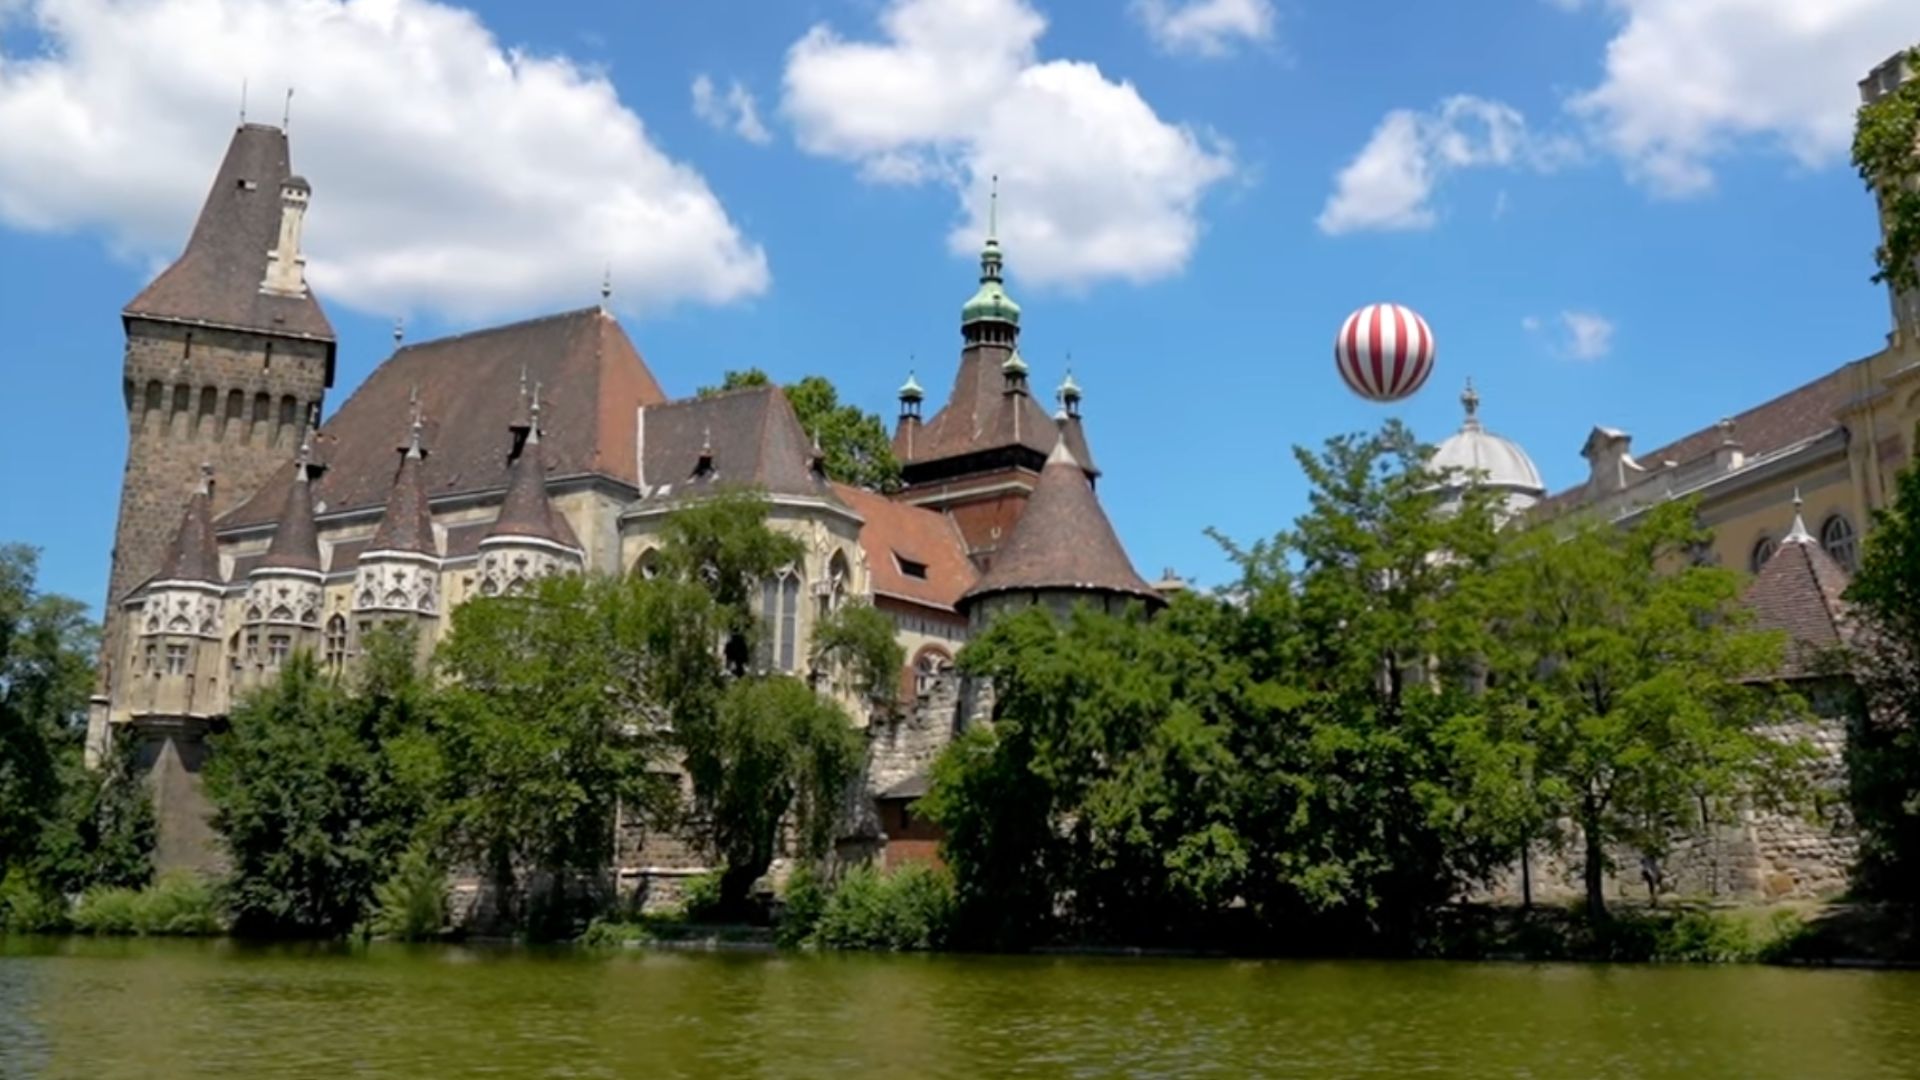 View of Vajdahunyad Castle in Budapest with a hot air balloon in the background.